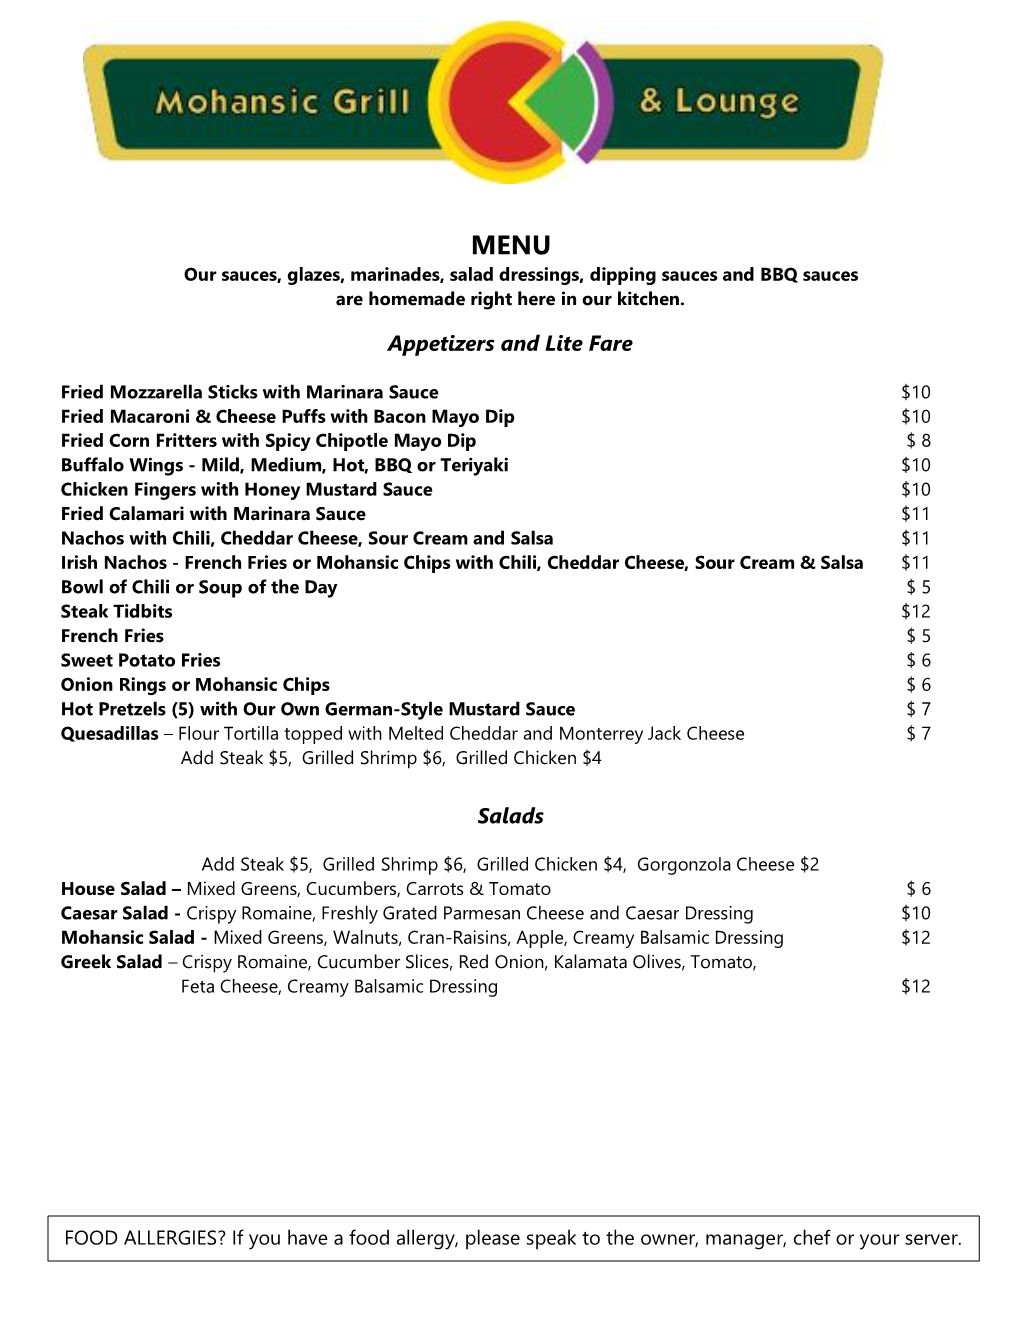 Our Re-Opening Menu